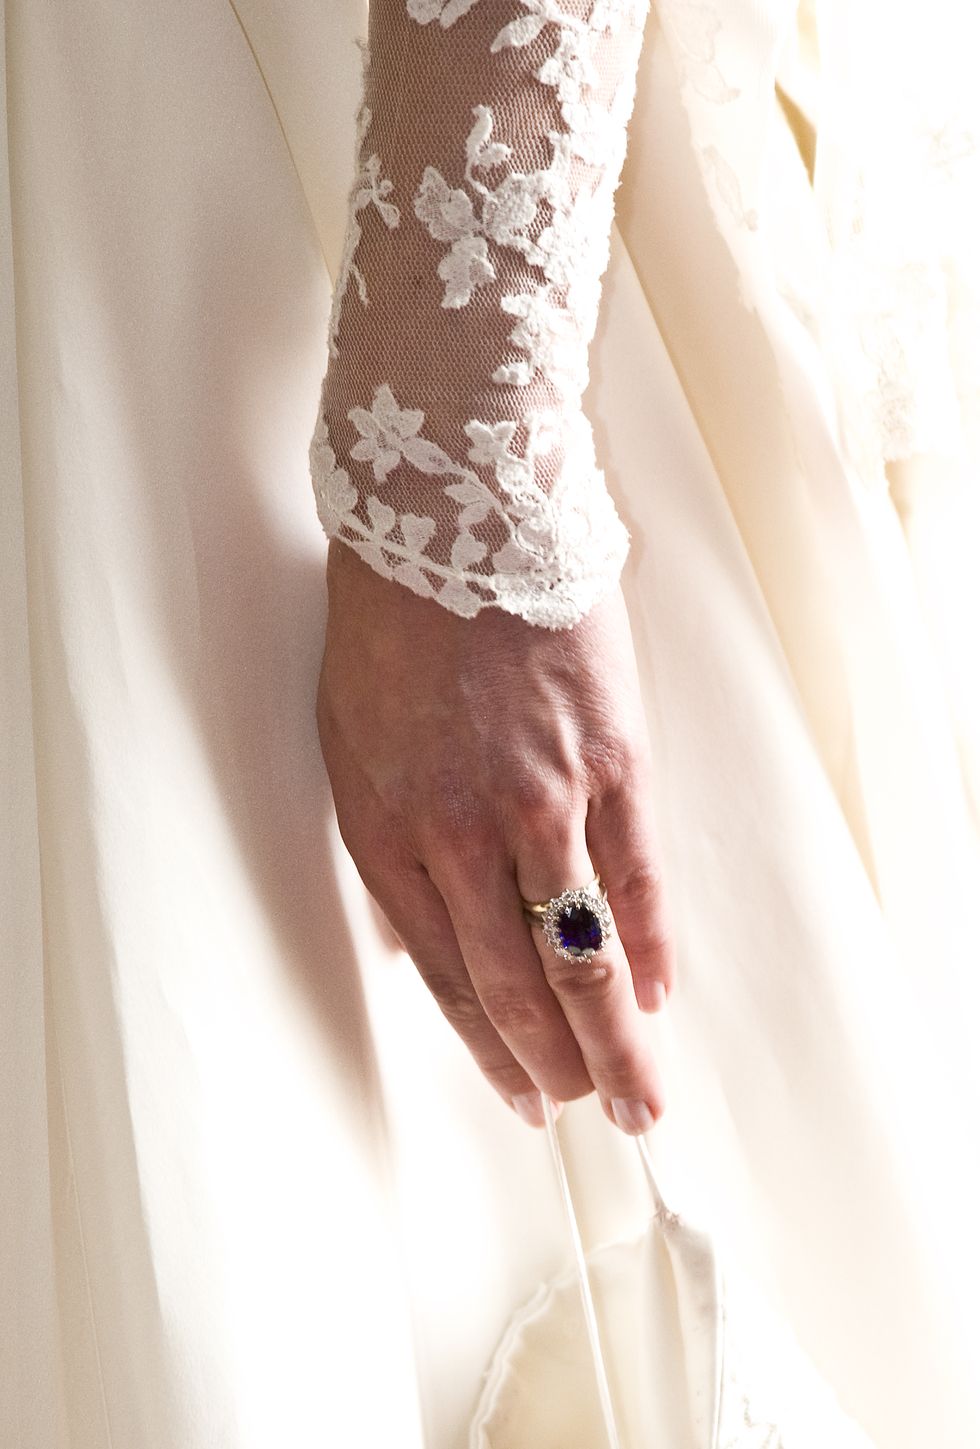 a closer look at kate's wedding band and engagement ring, taken on her wedding day